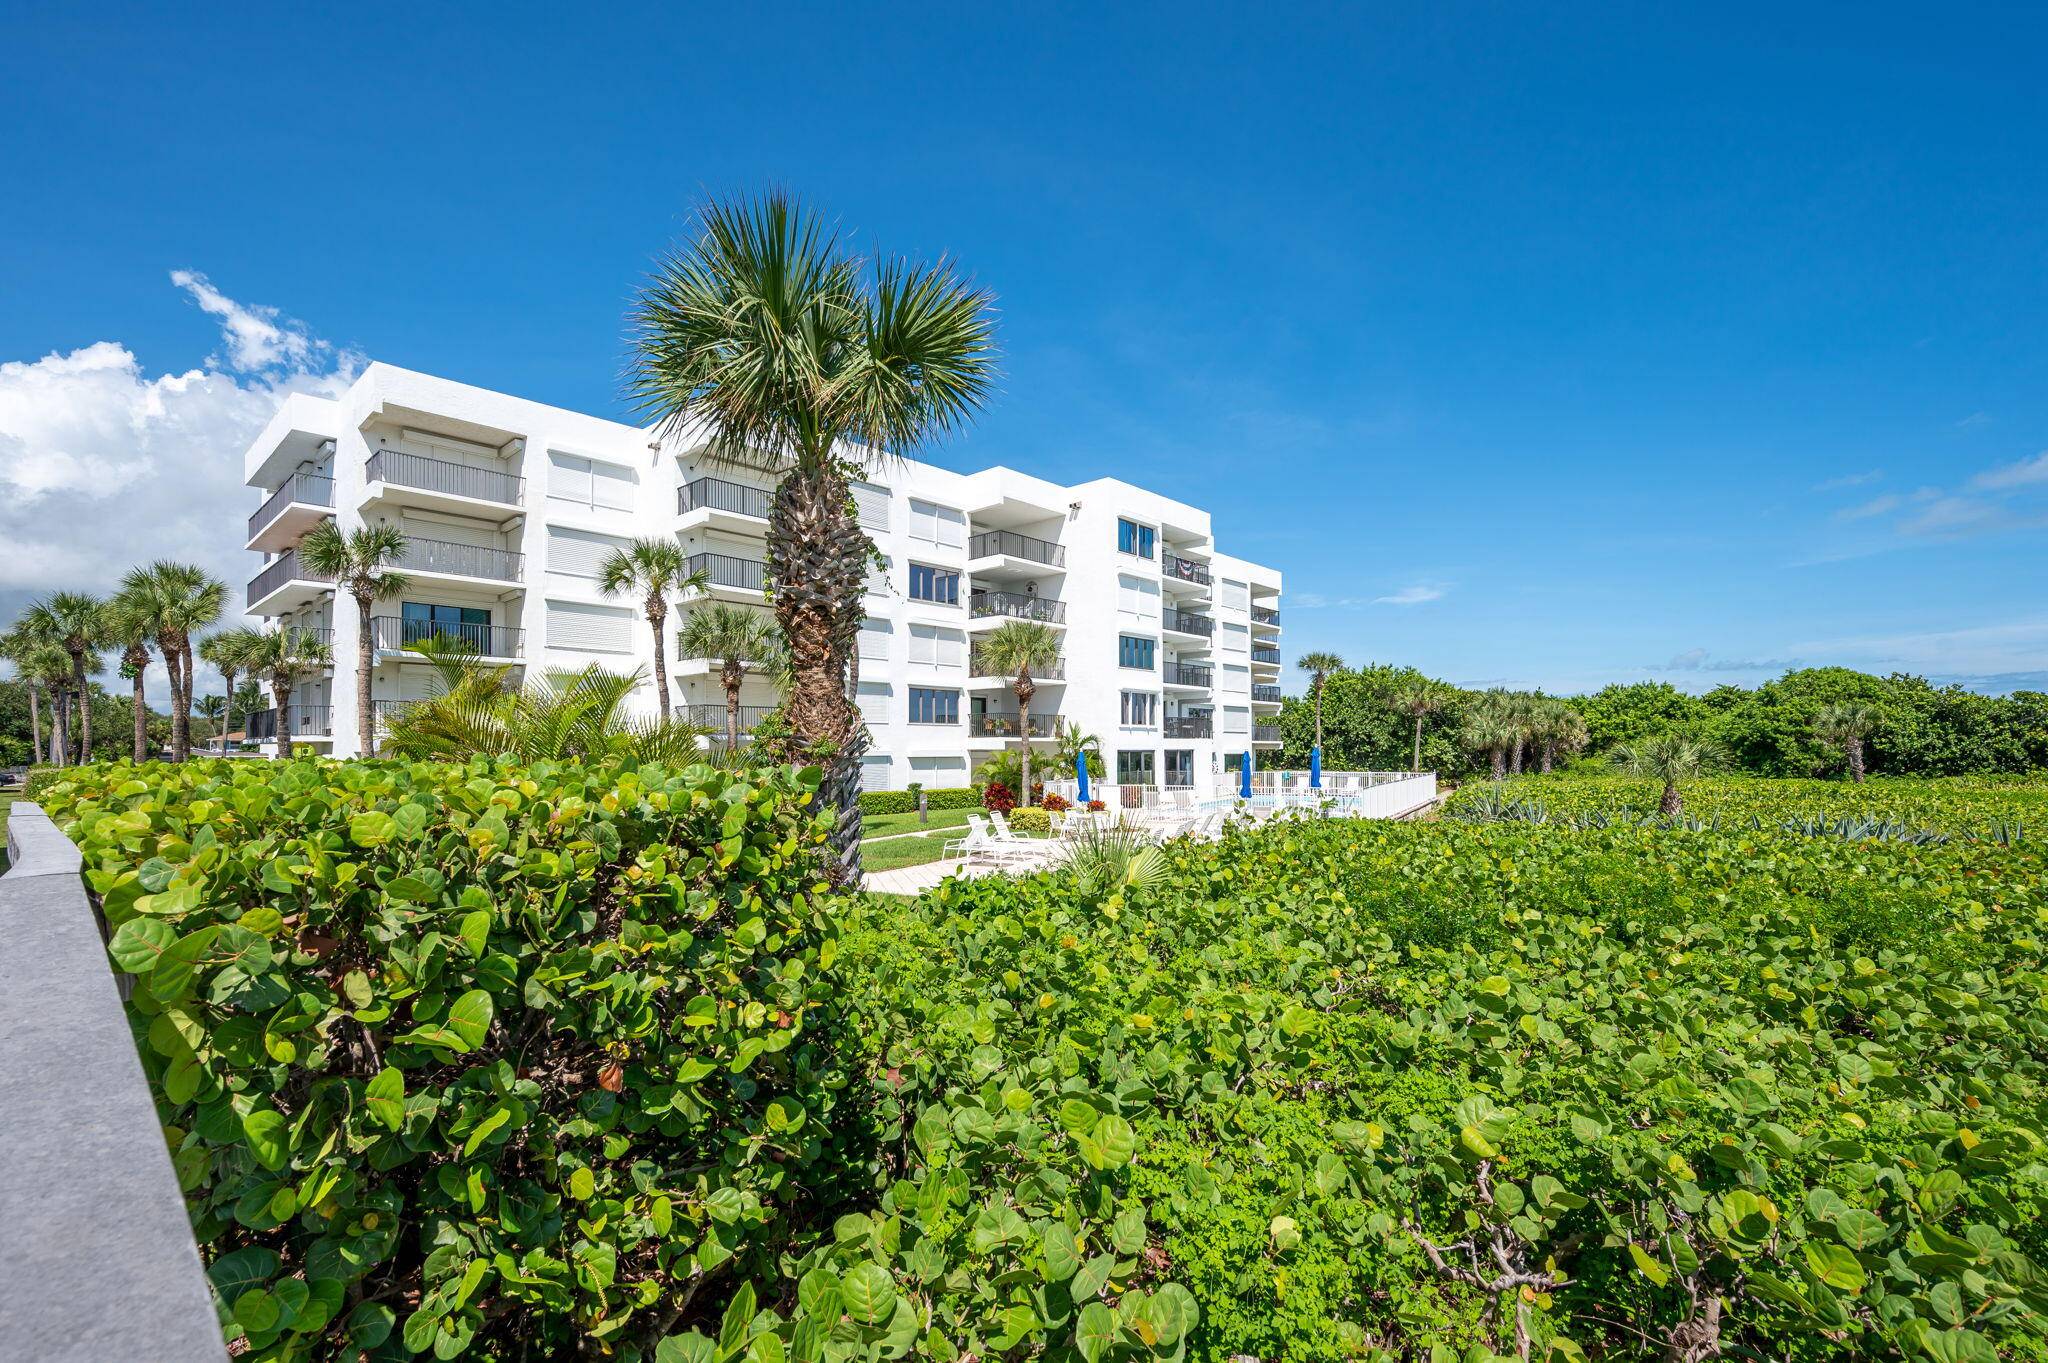 Light and breezy condo in a beachfront building, overlooking one of the finest beaches in town.